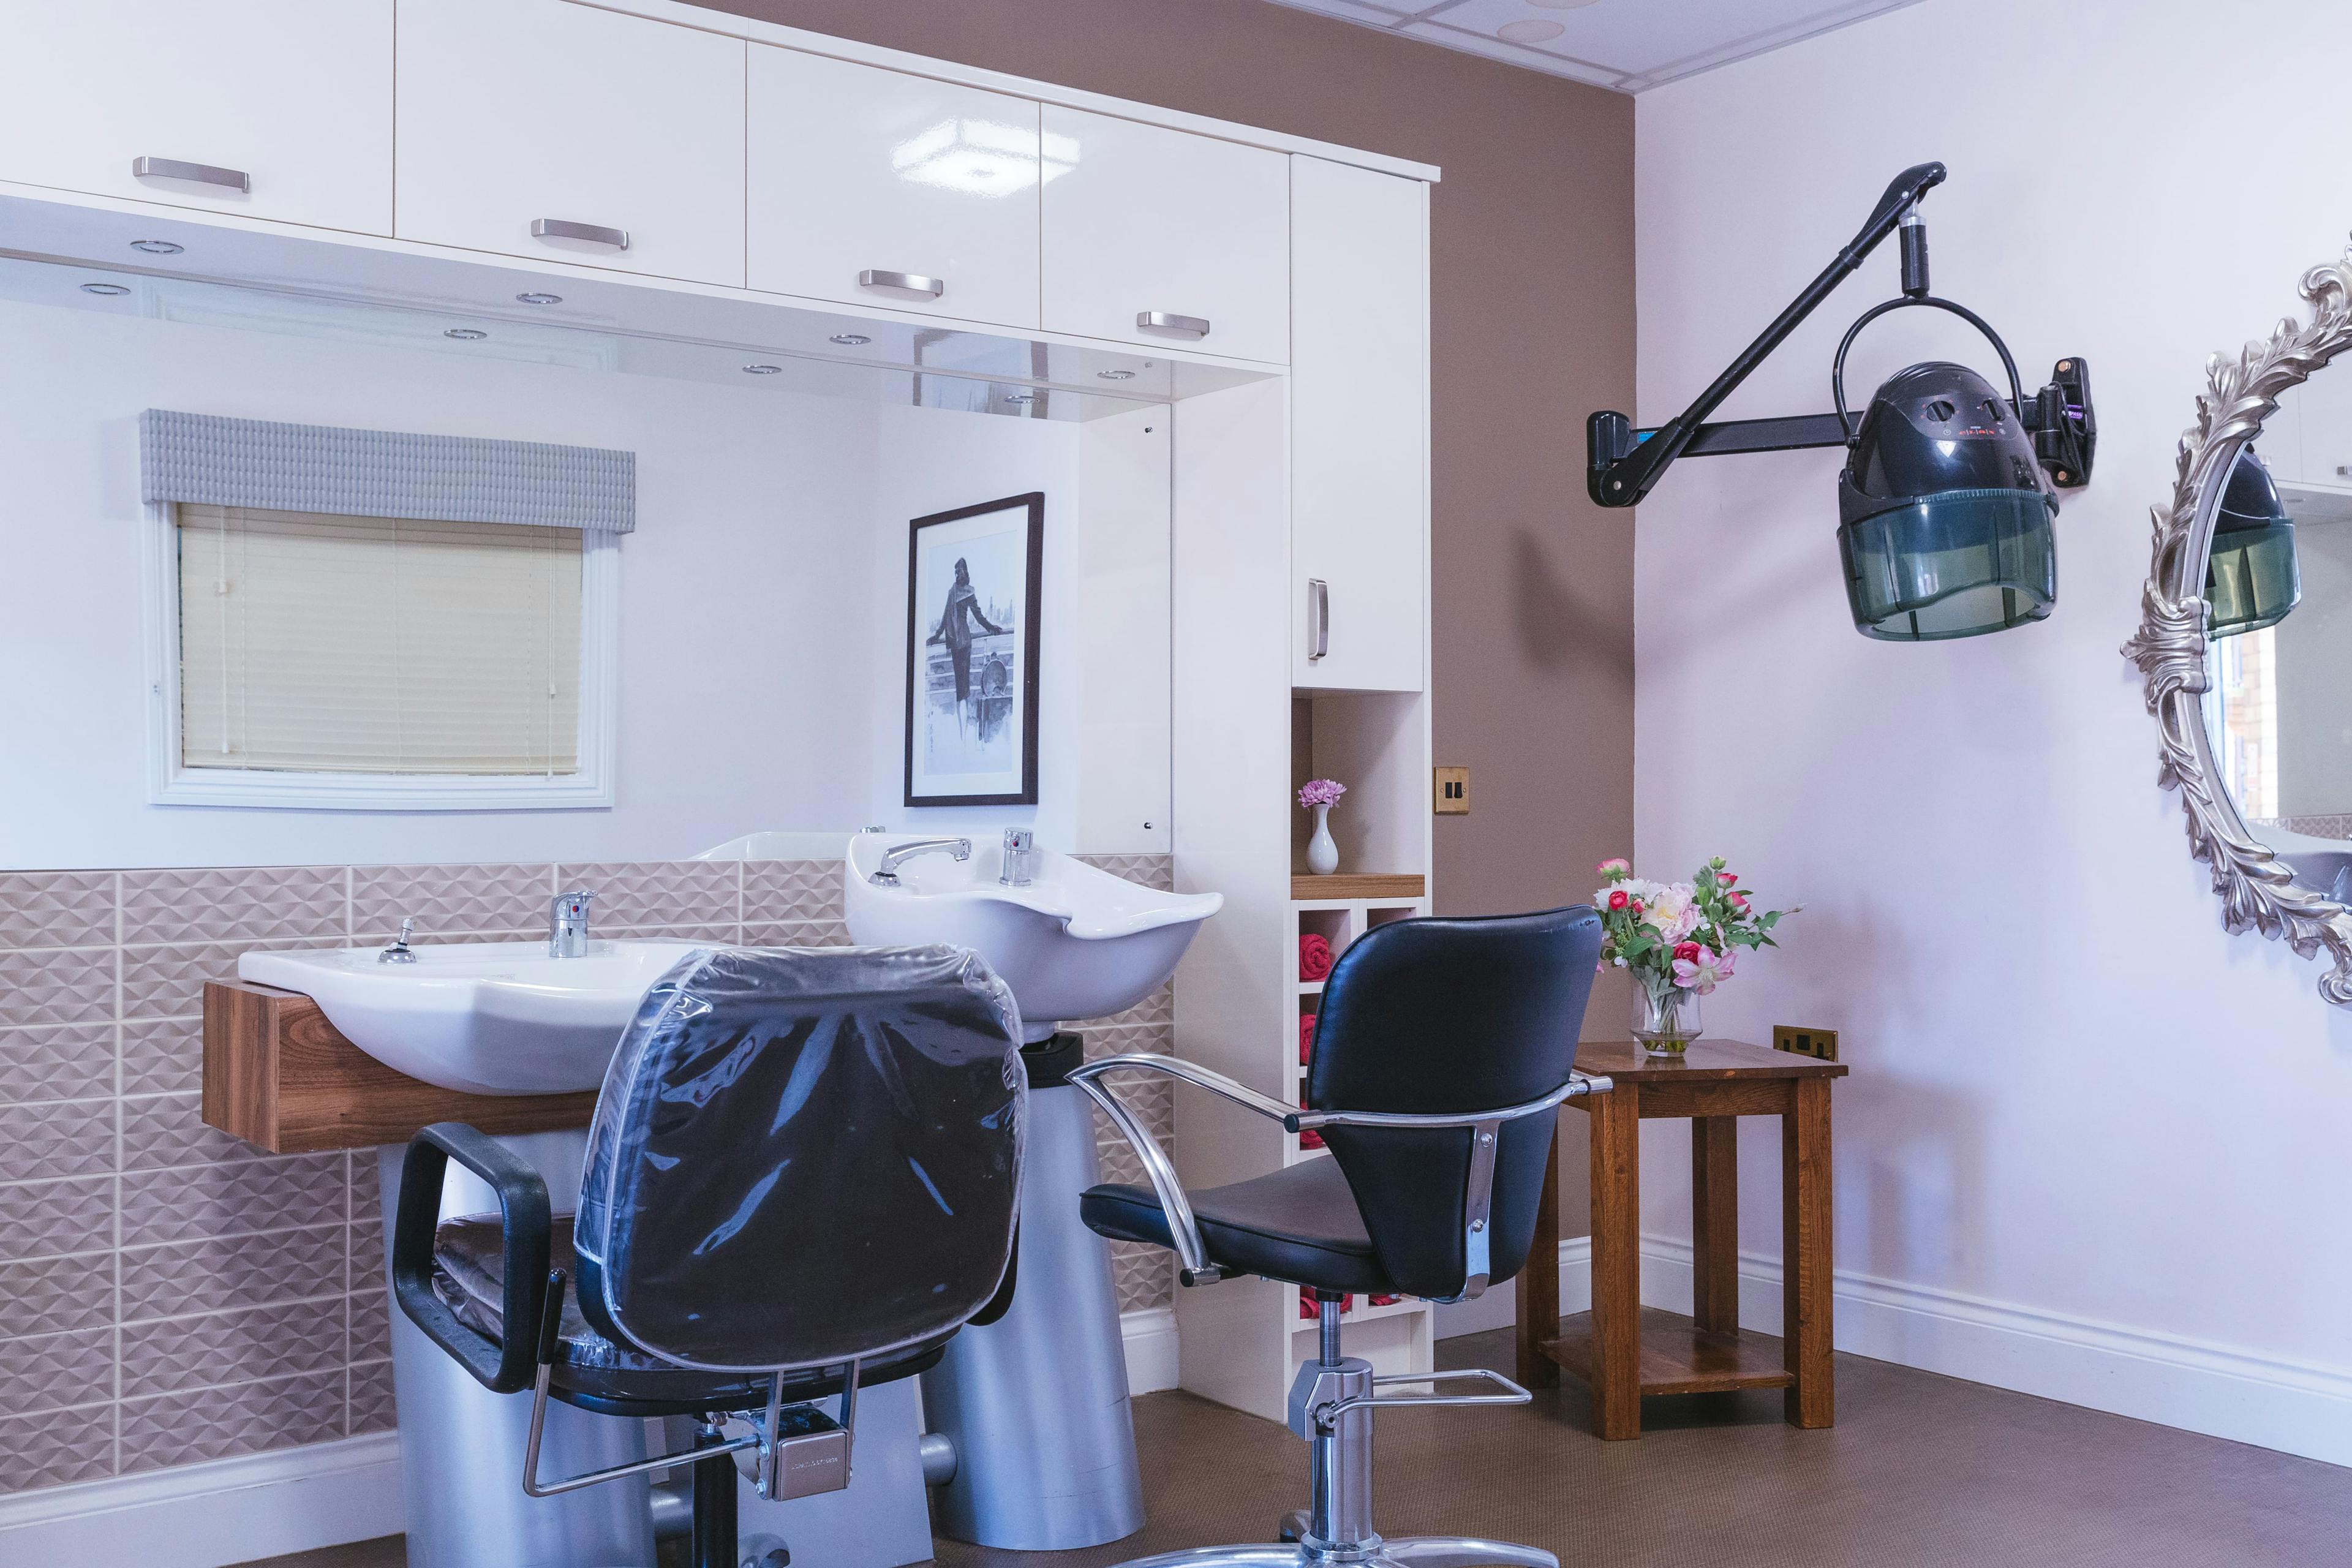 Salon at Rose Lodge Care Home in Wisbech, Cambridgeshire